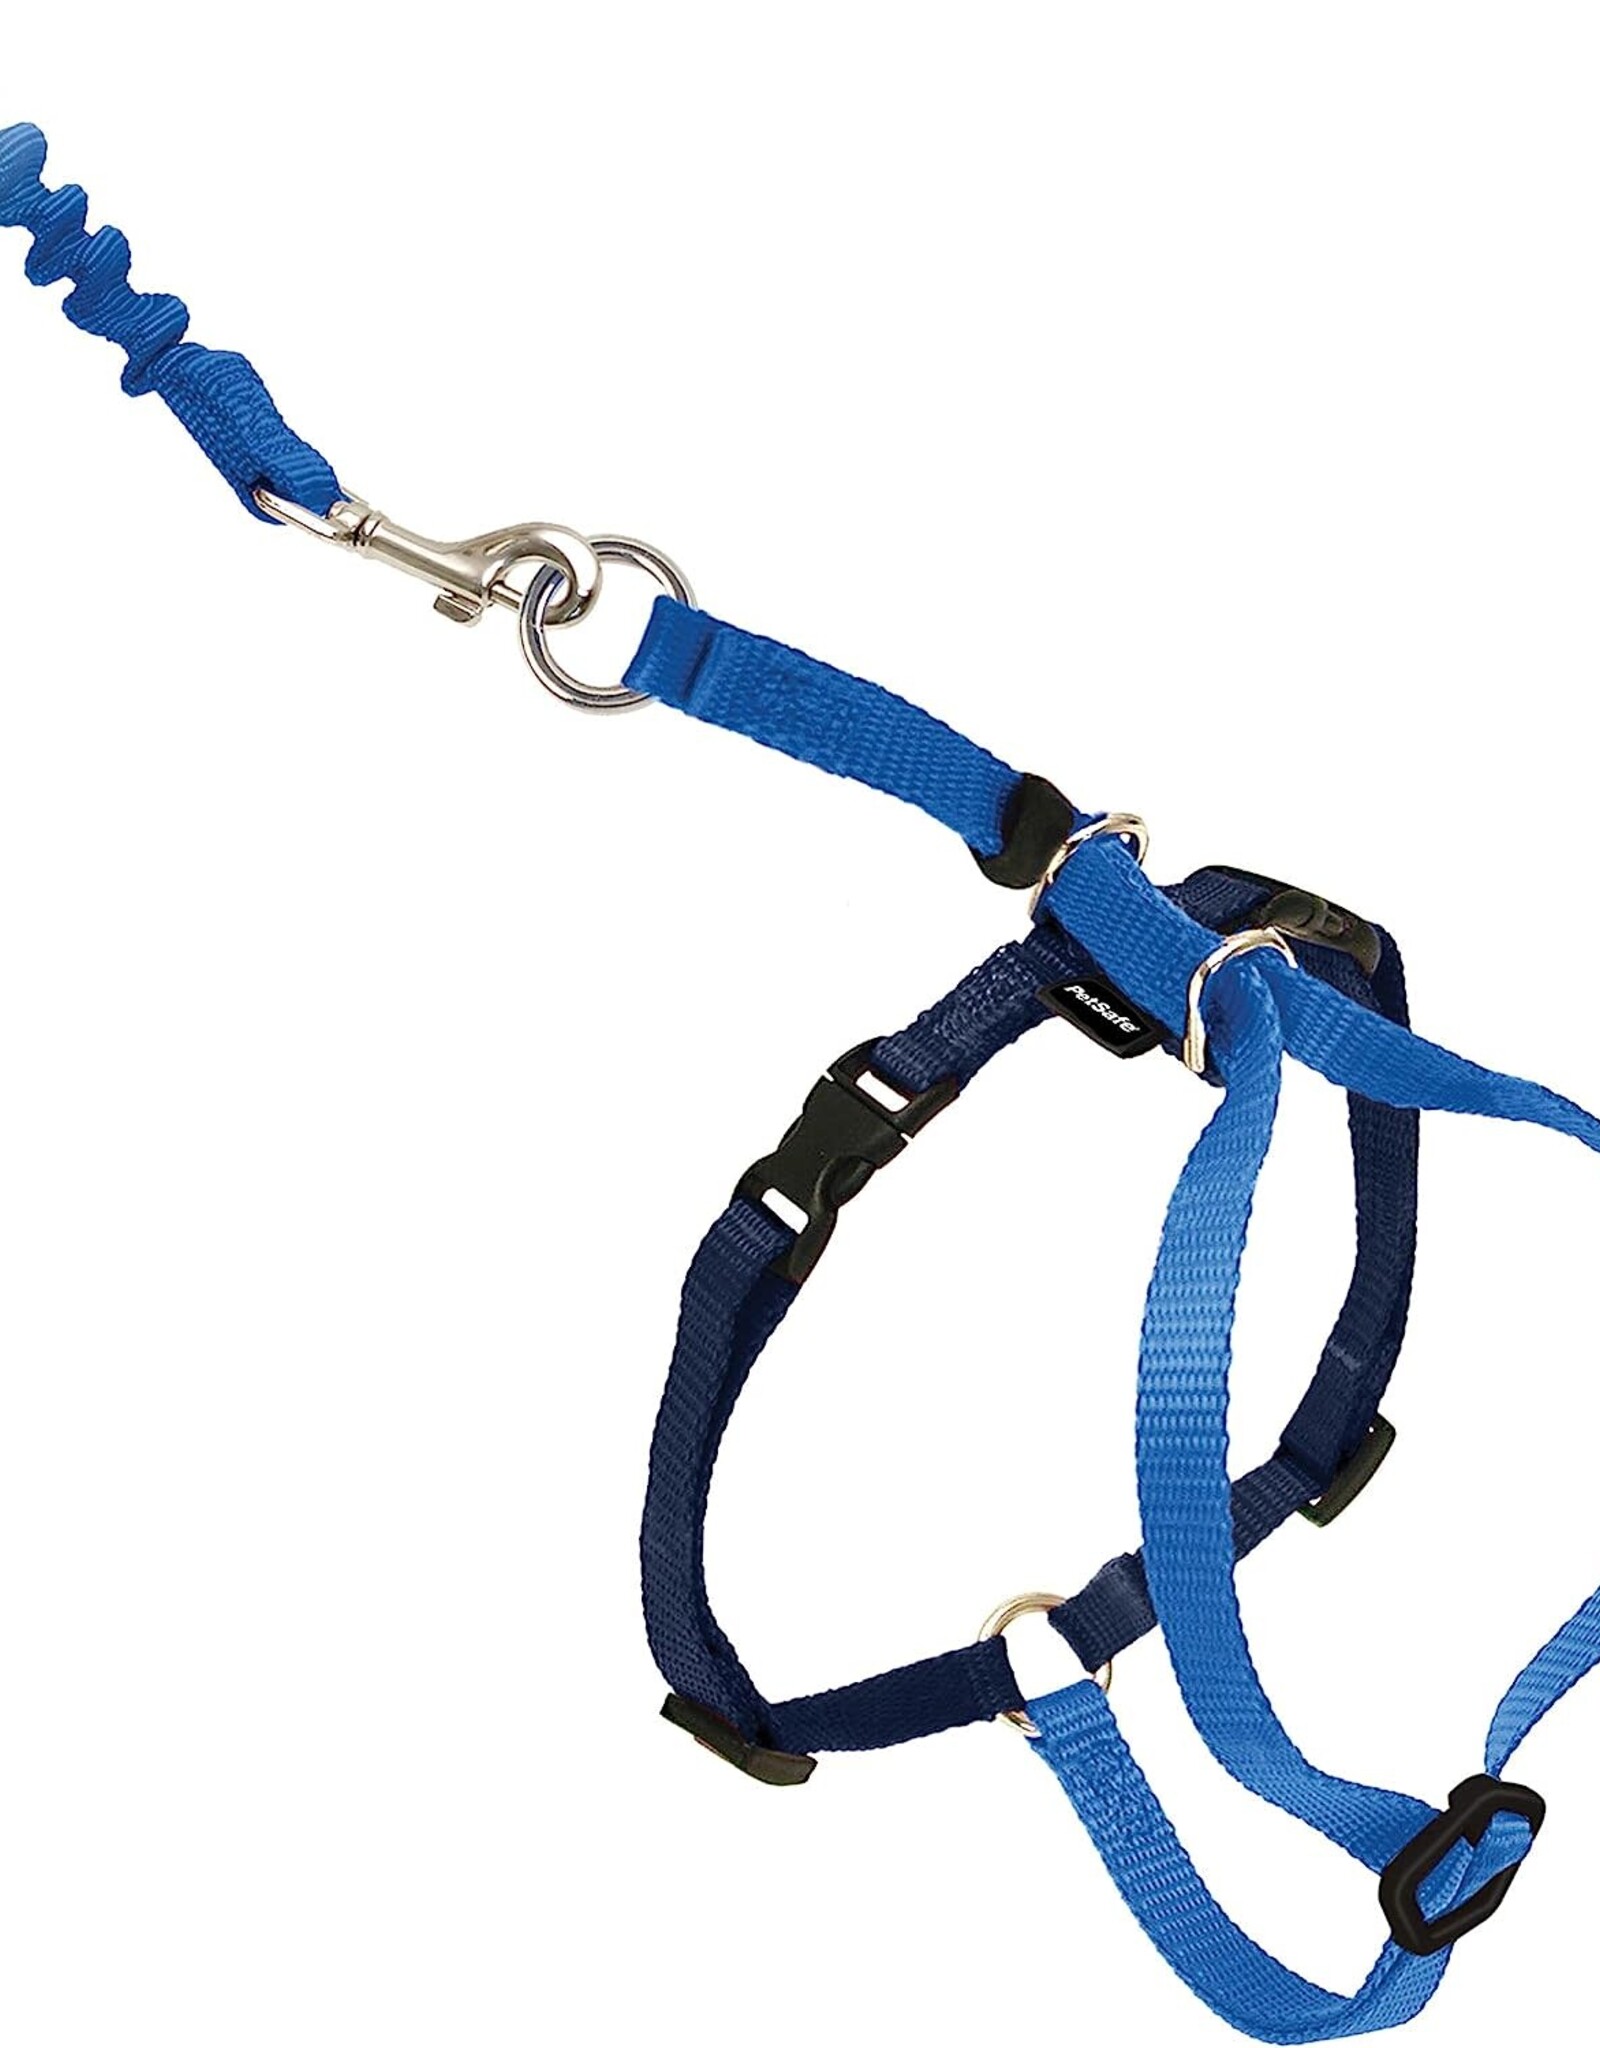 RADIO SYSTEMS CORP(PET SAFE) Come With Me Kitty Harness & Bungee Leash Large Royal Blue